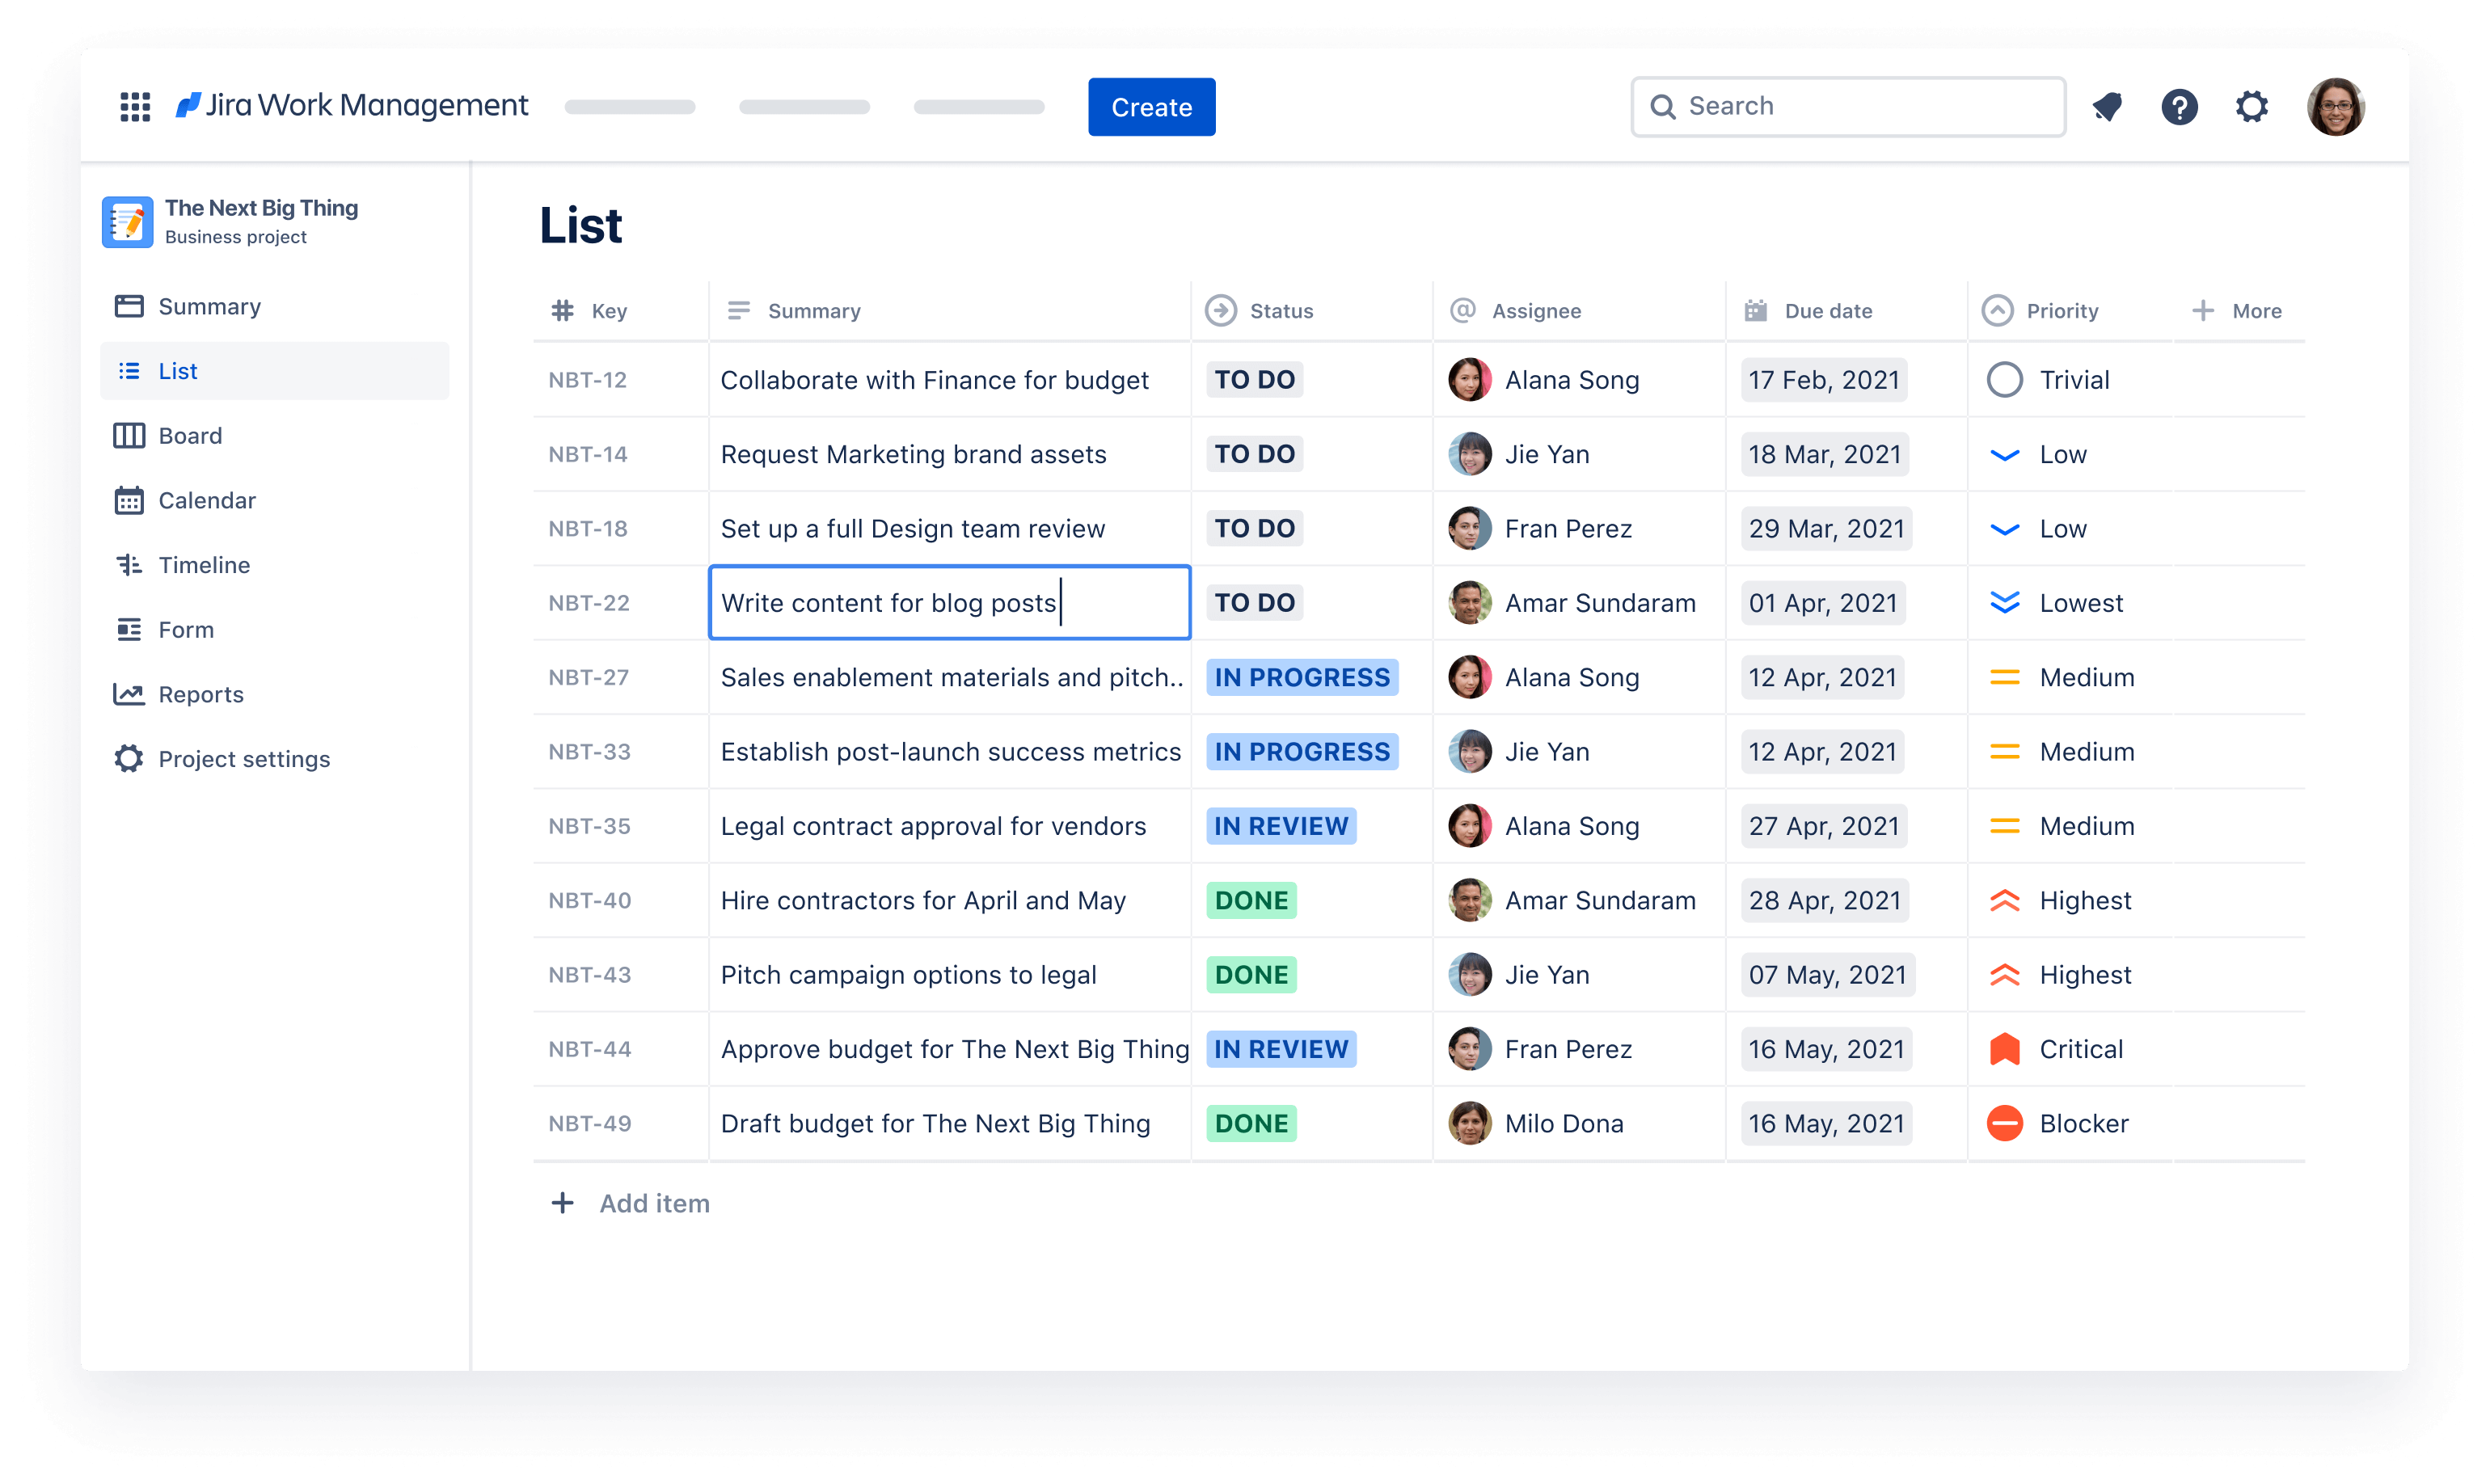 Get to know the List View from Jira Work Management